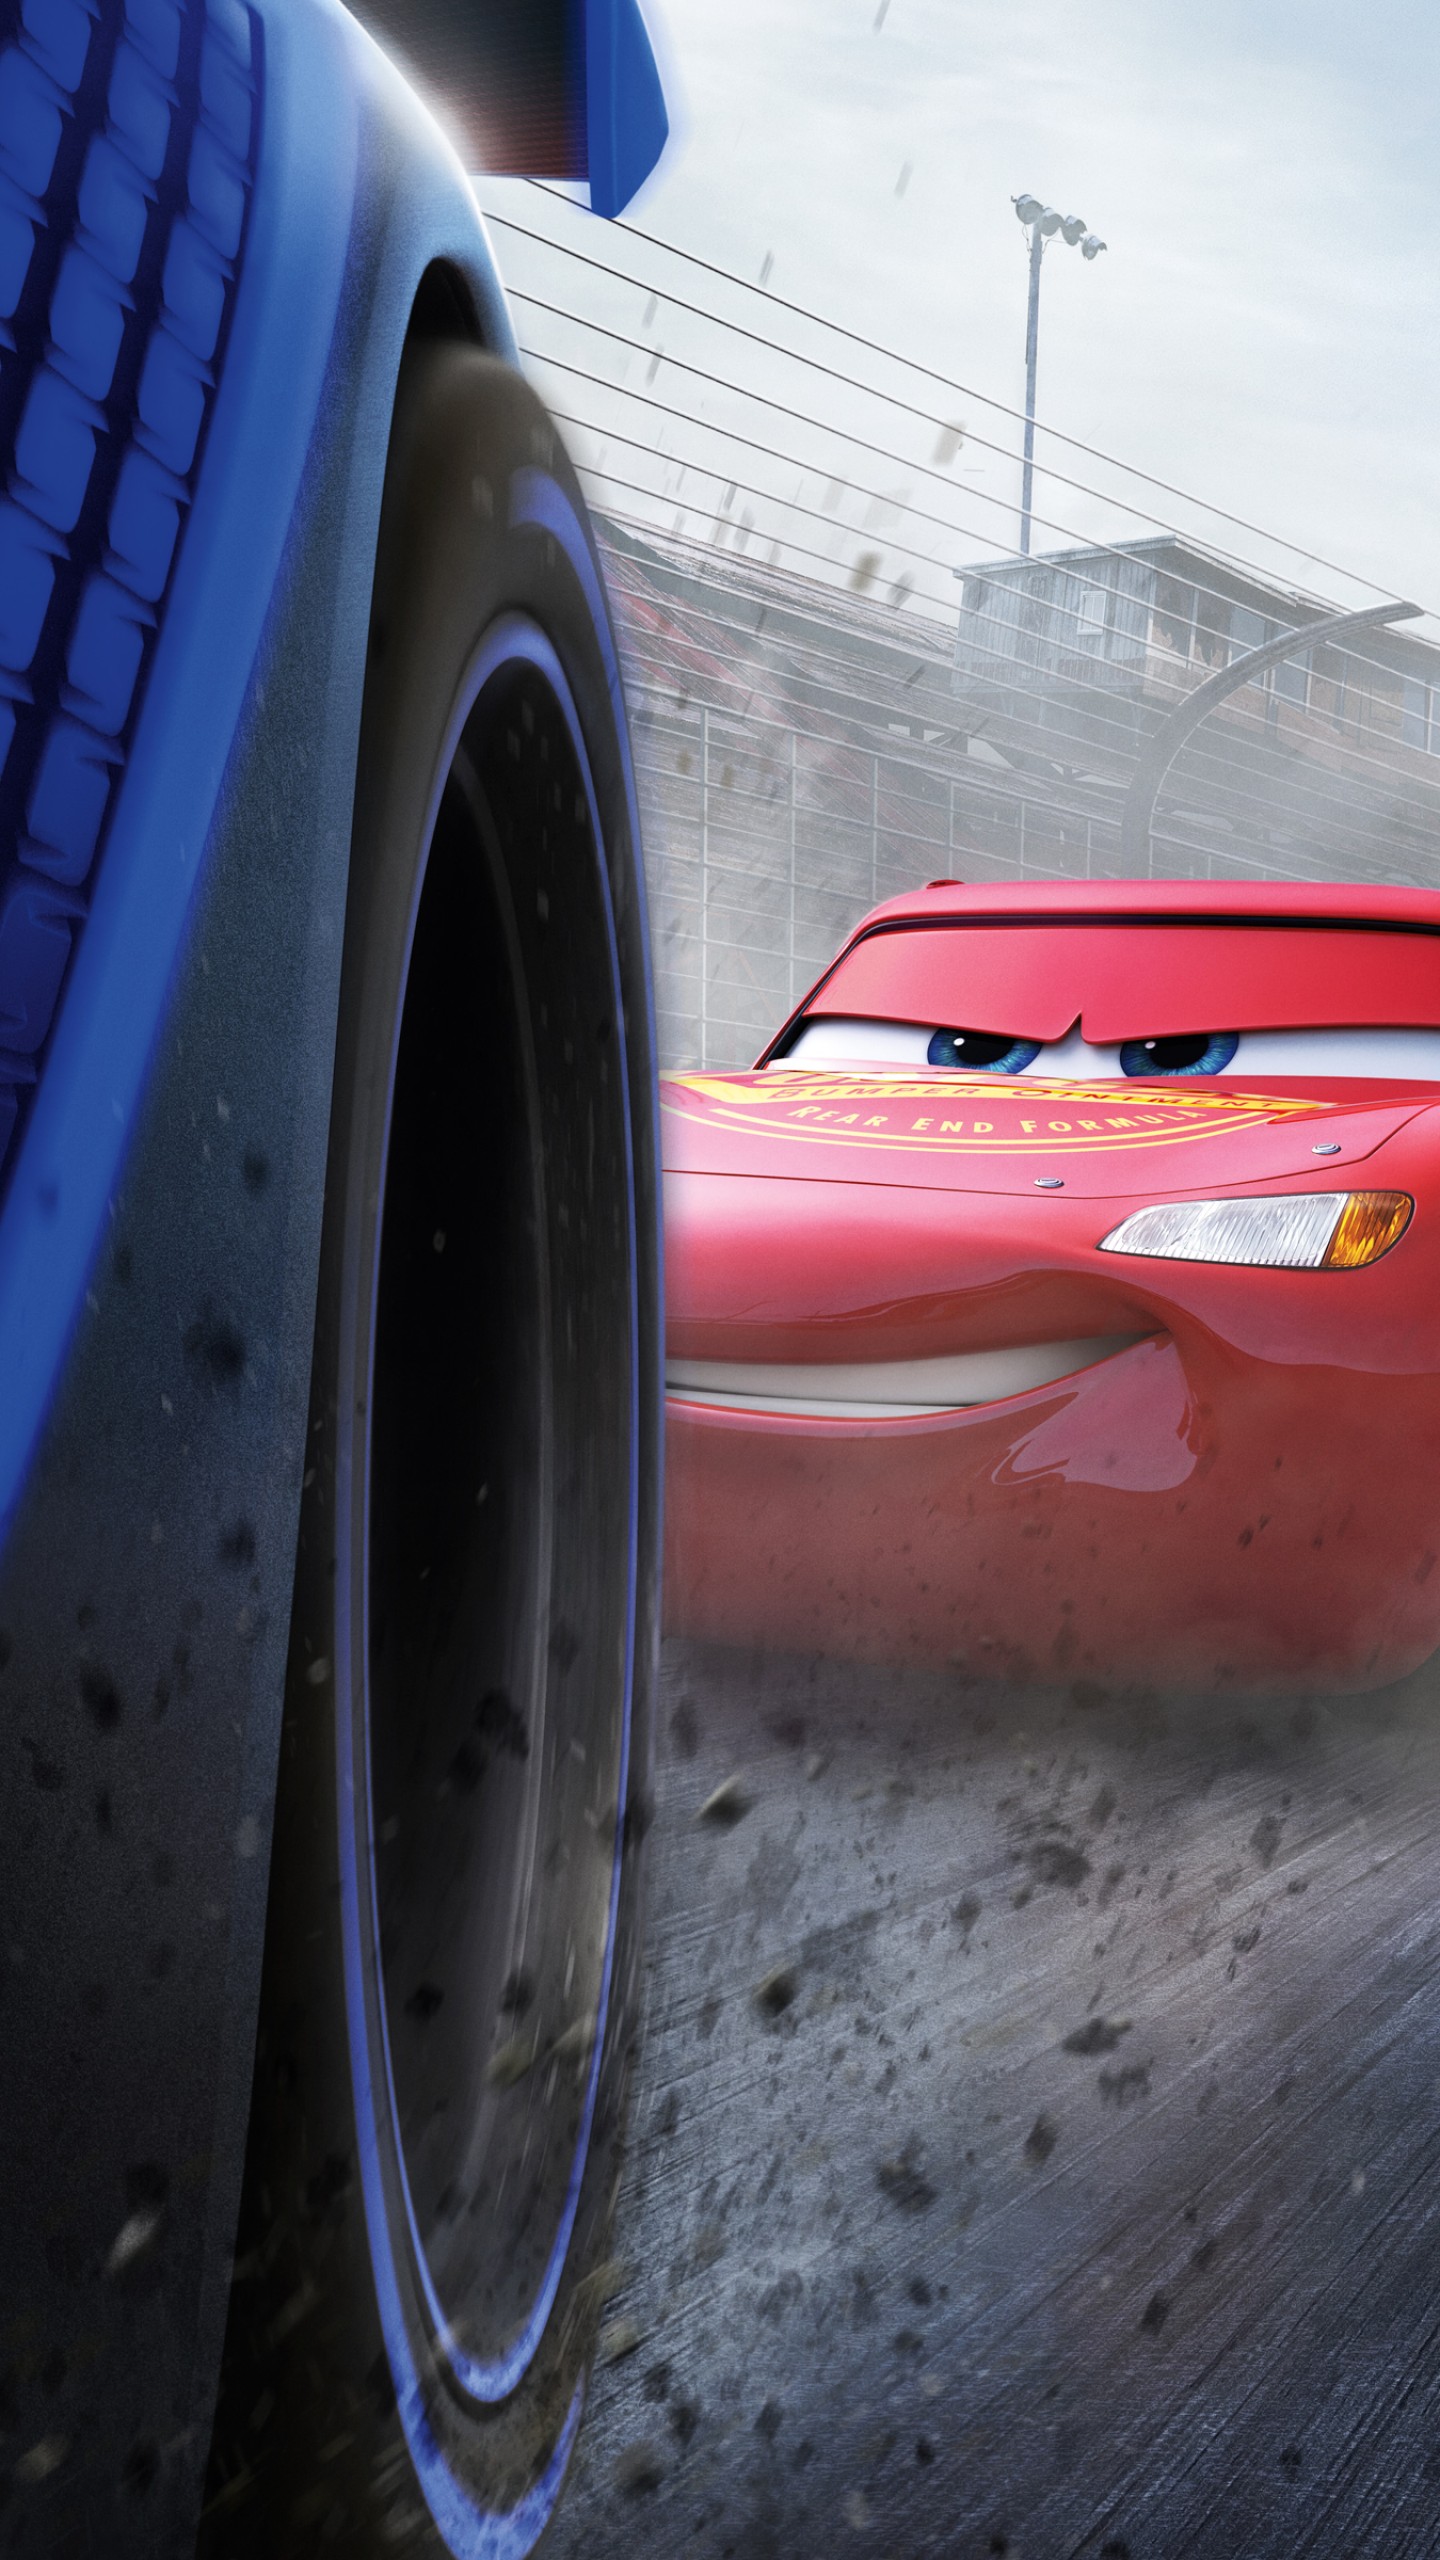 Lightning Mcqueen Wallpaper Discover more 1080p android cars 3 desktop ipad  wallpaper httpswwwn  Lightning mcqueen Disney cars Cars 3 lightning  mcqueen